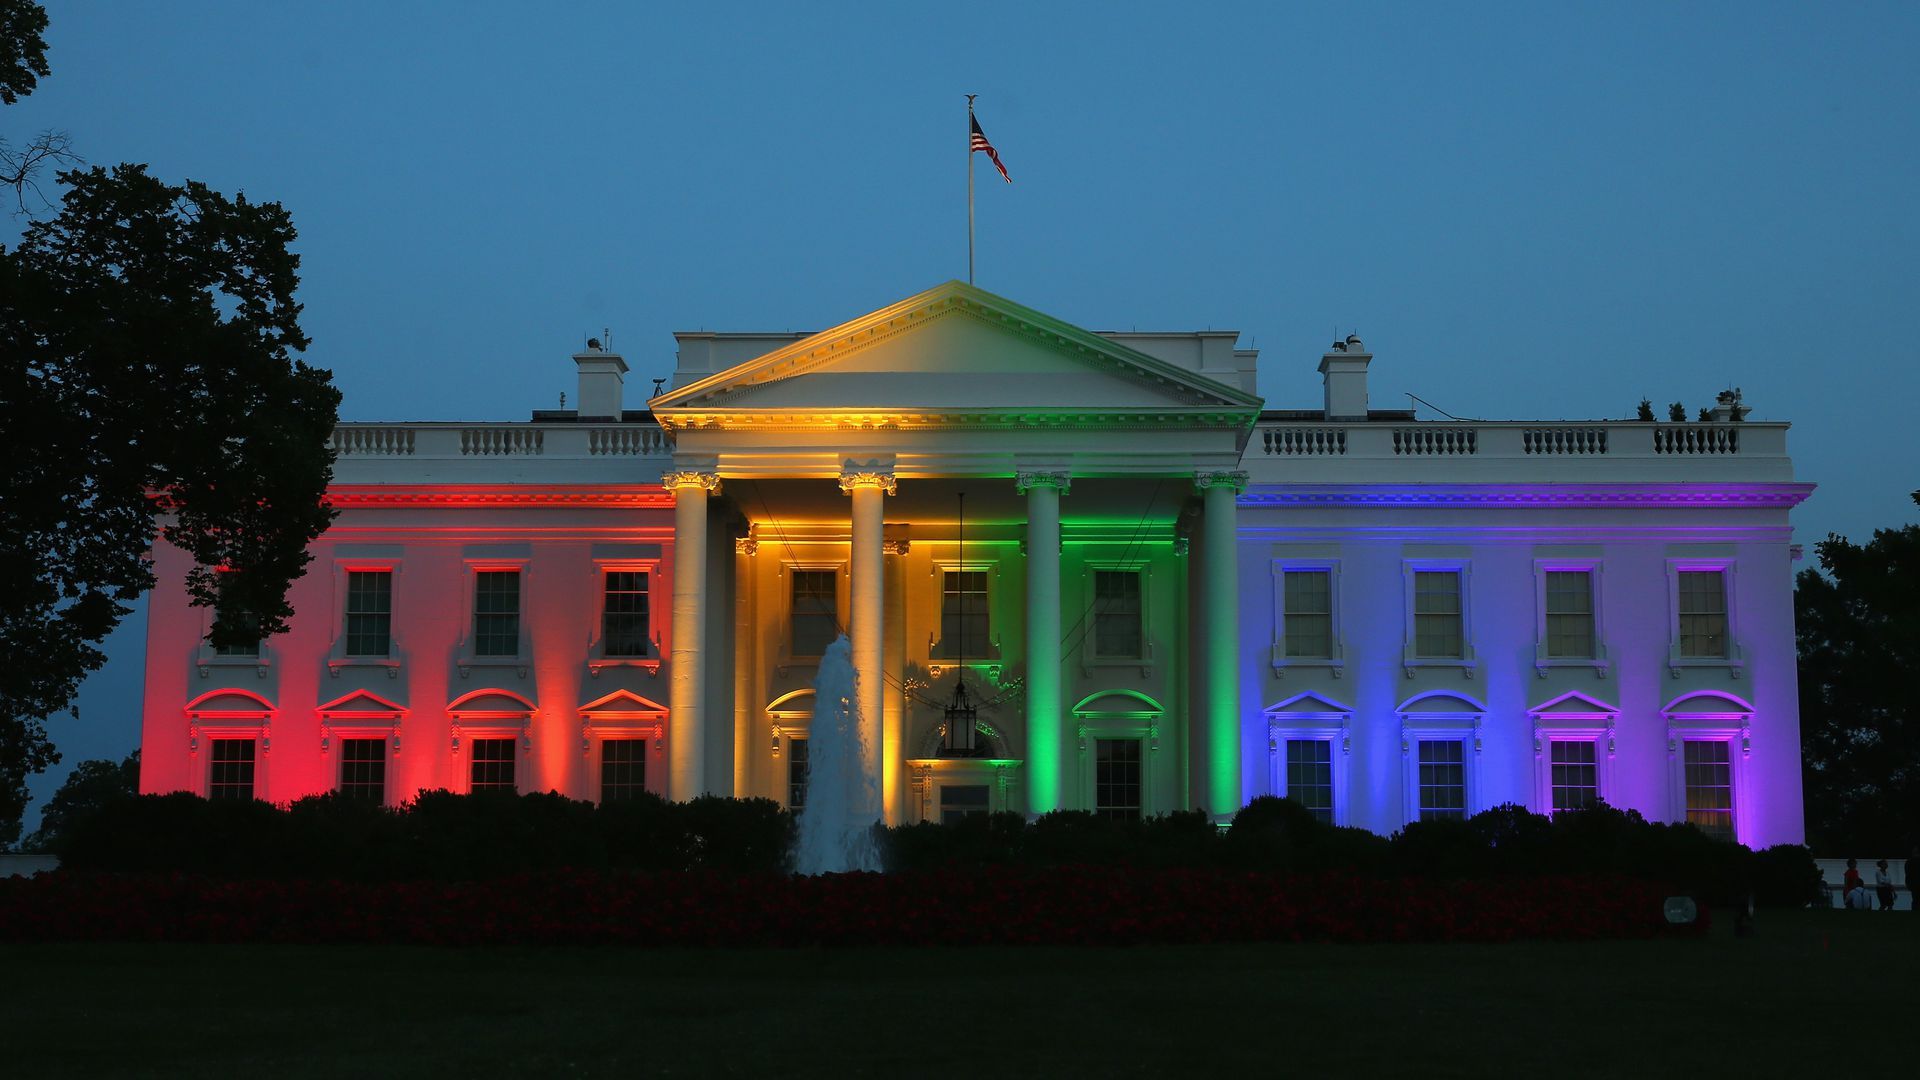 On June 26, 2015, President Obama's aides lit the White House to celebrate the day's Supreme Court ruling in favor of same-sex marriage. Photo: Mark Wilson/Getty Images